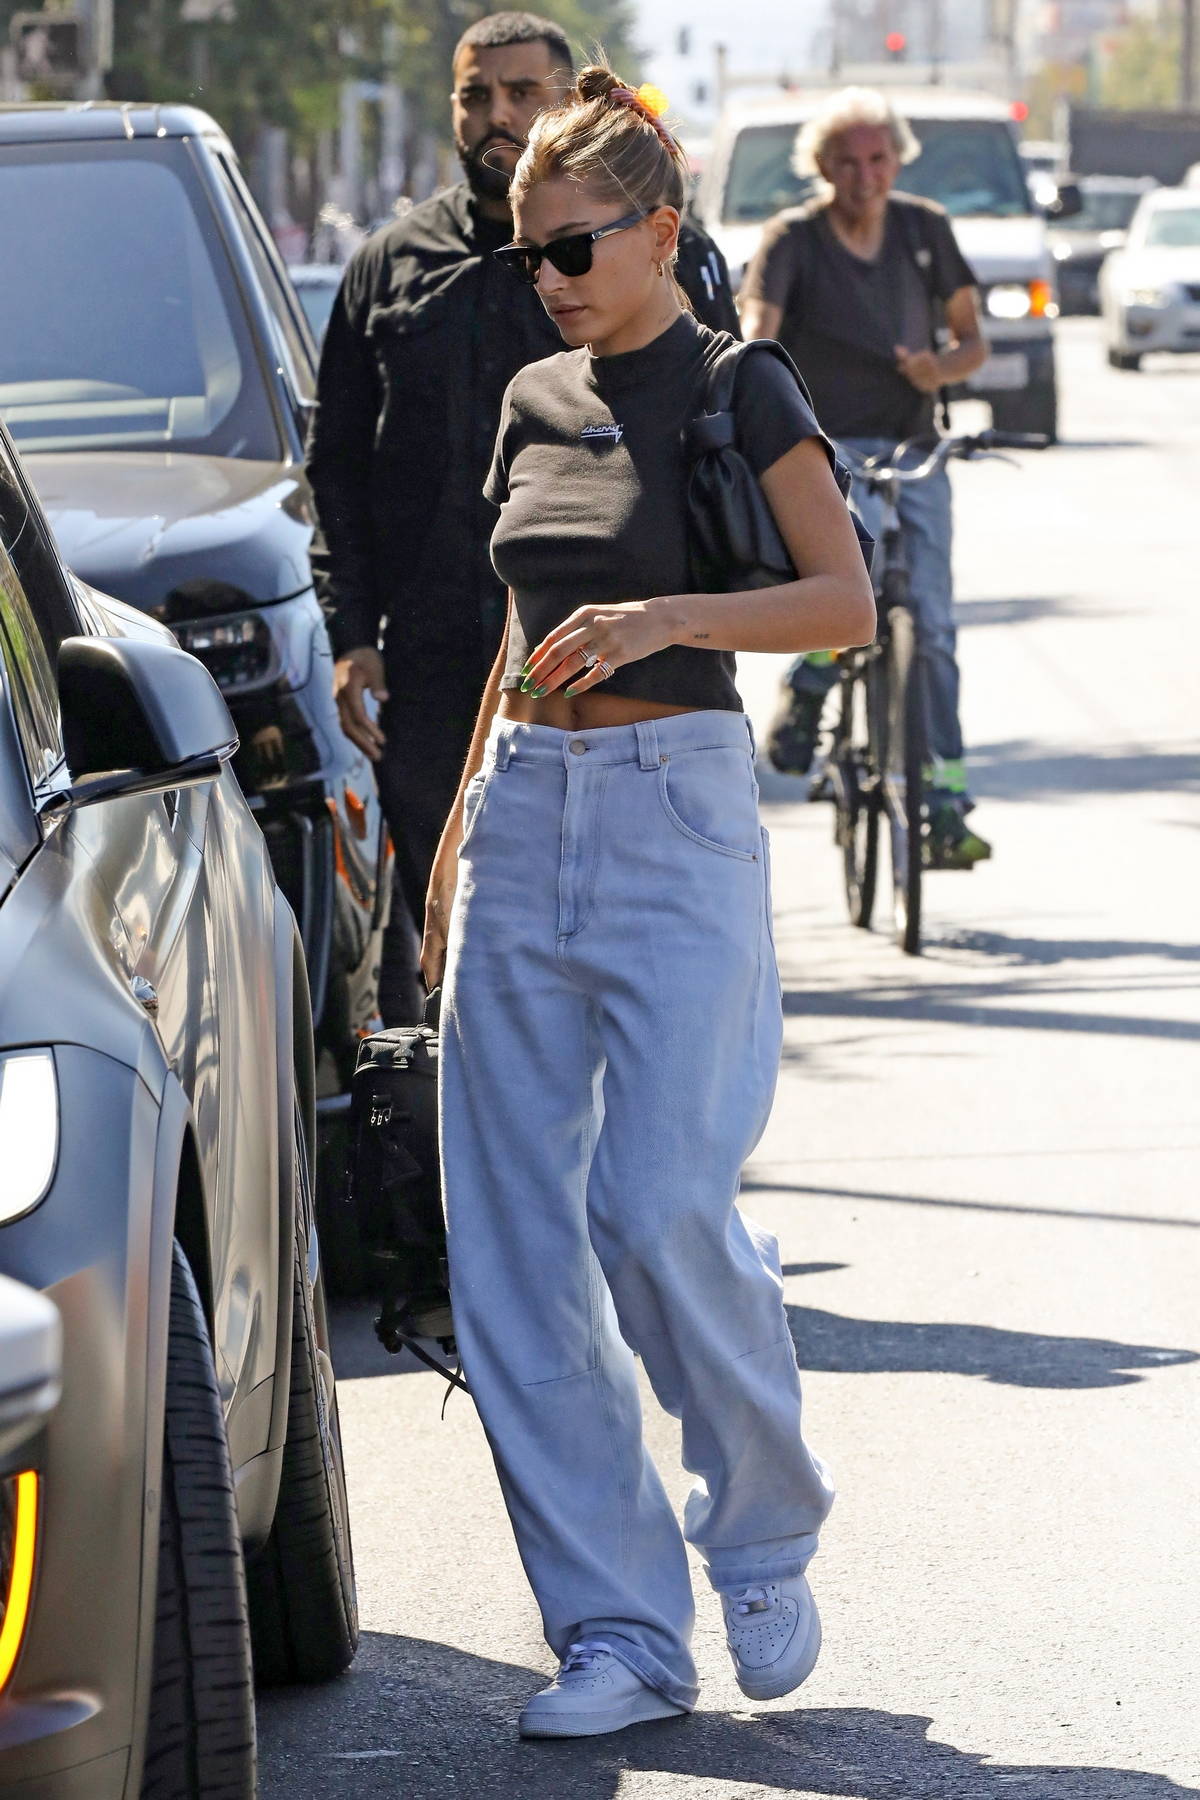 Hailey Bieber Shows Us How To Rock The Baggy Jeans And Small Top